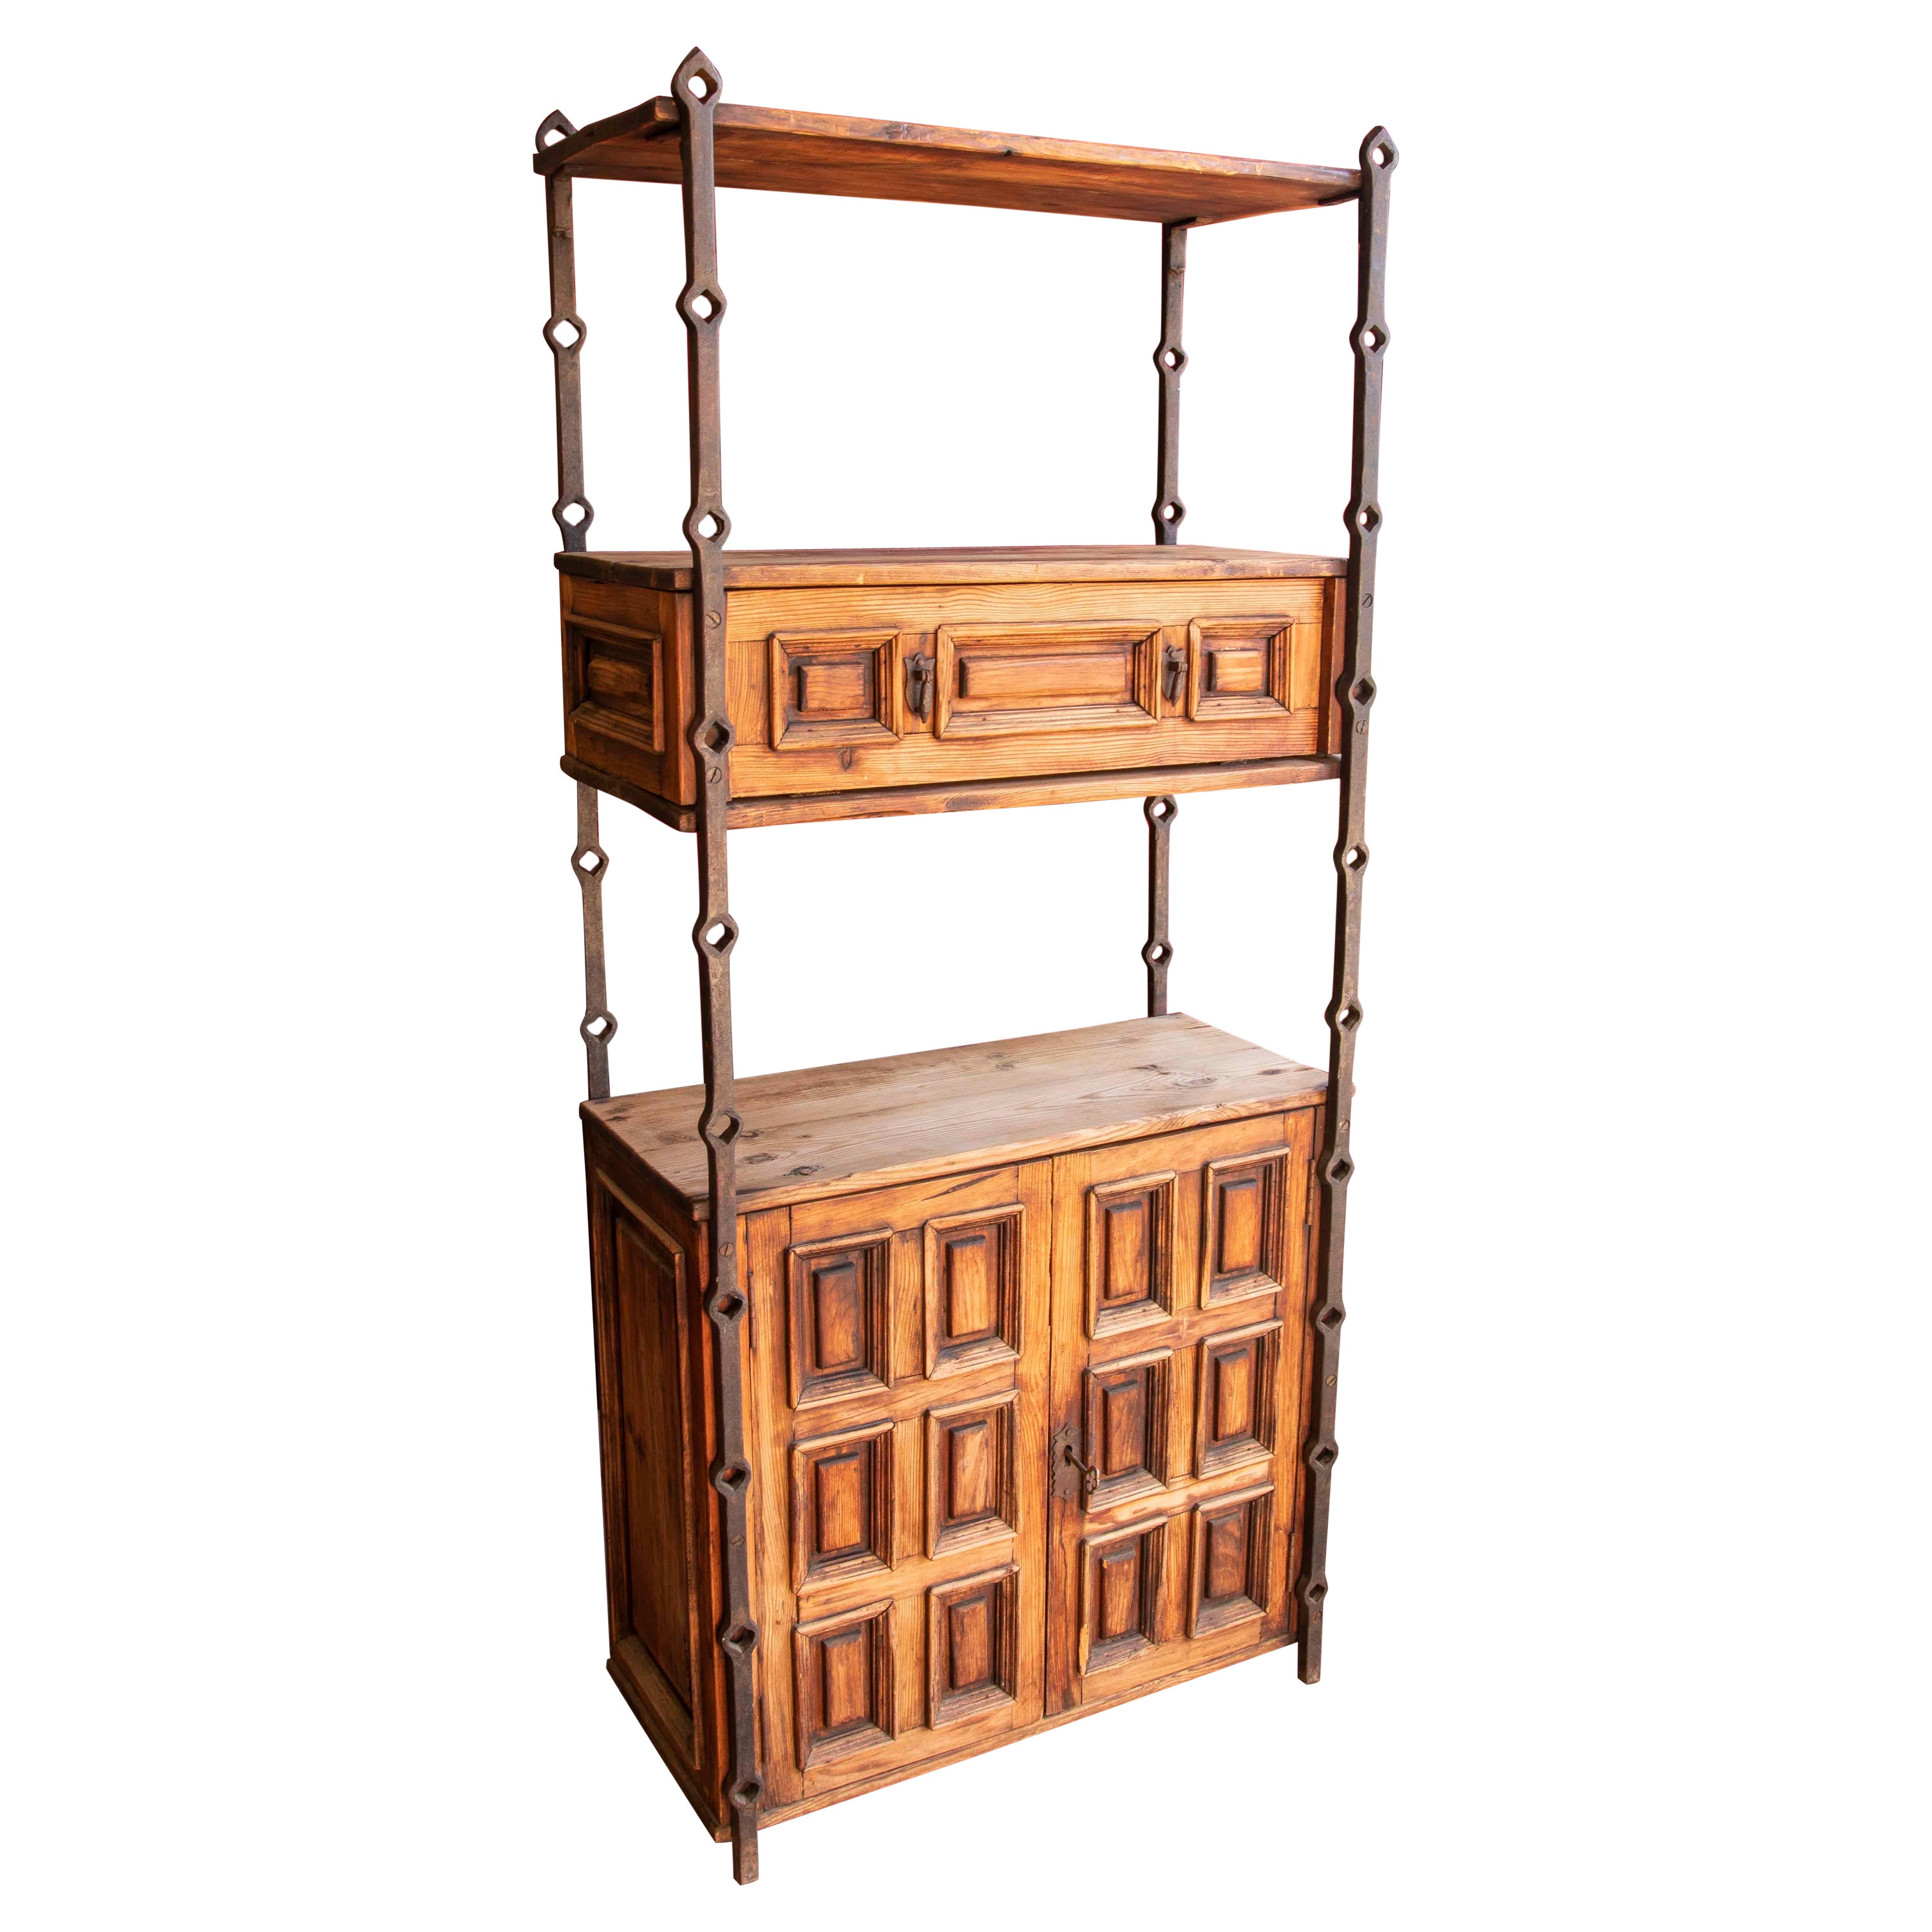 1970s Wooden Bookshelf with Paneling and Iron Decoration  For Sale